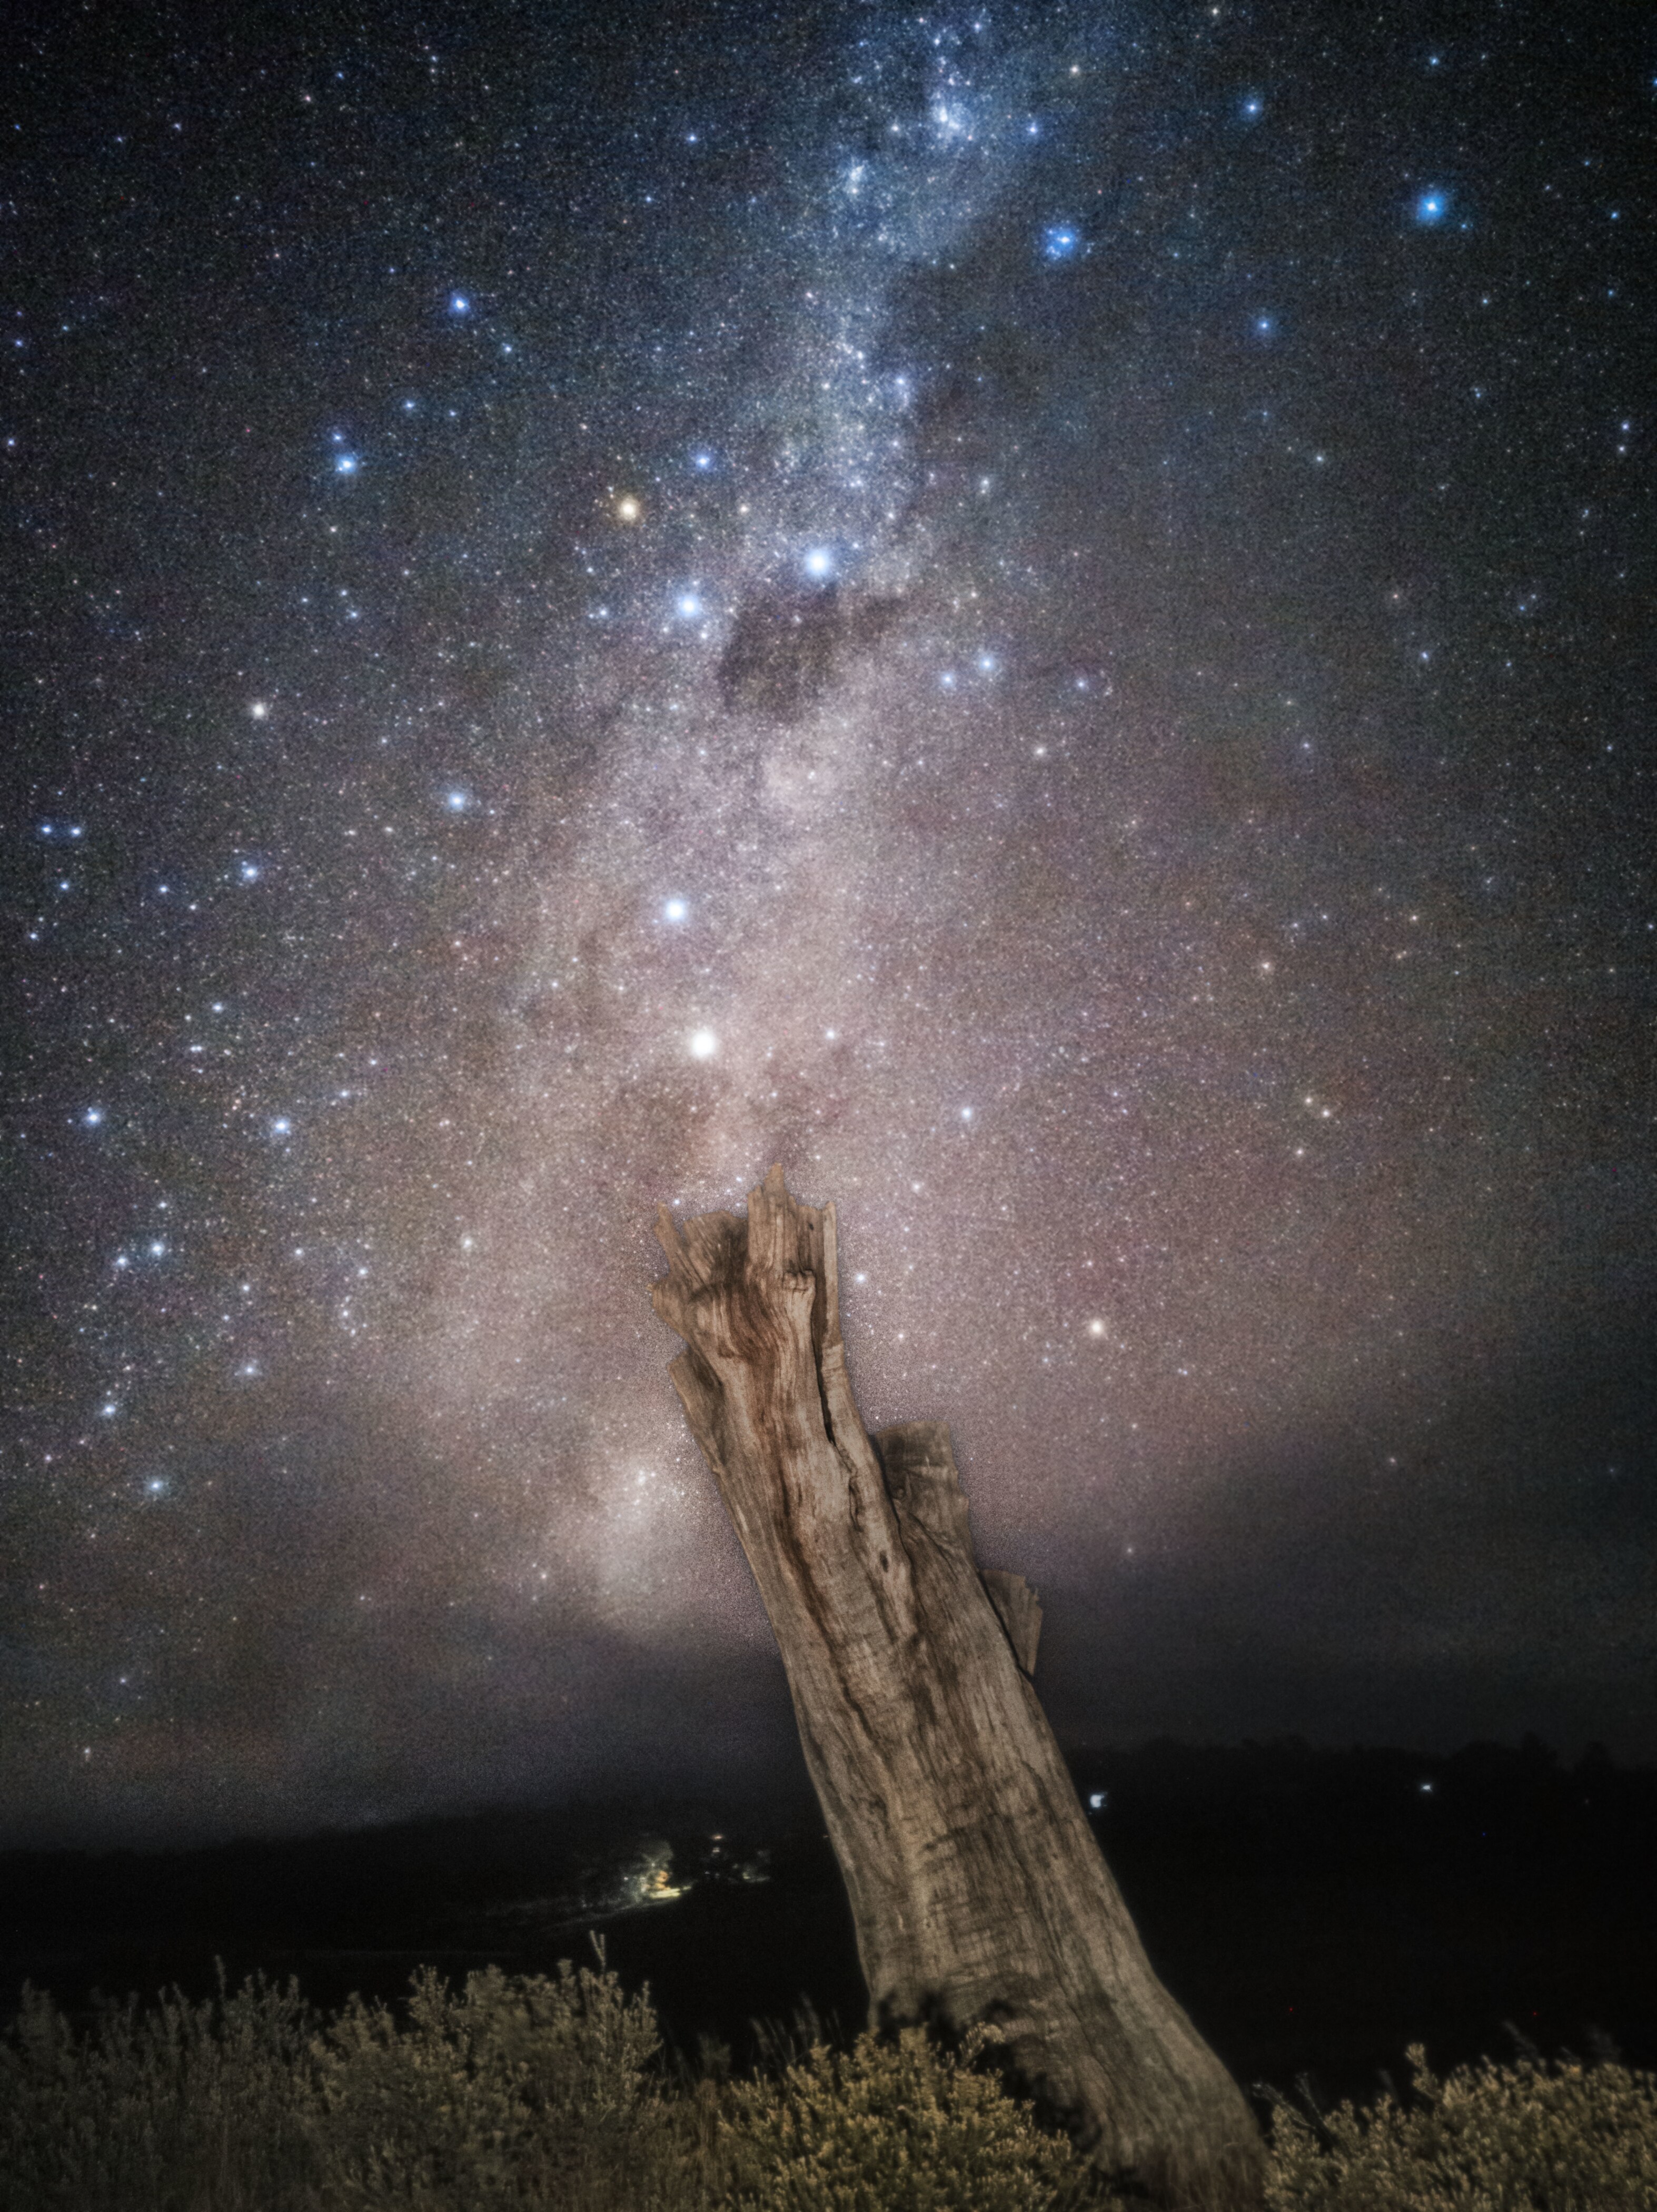 A tree stump before a background of stars